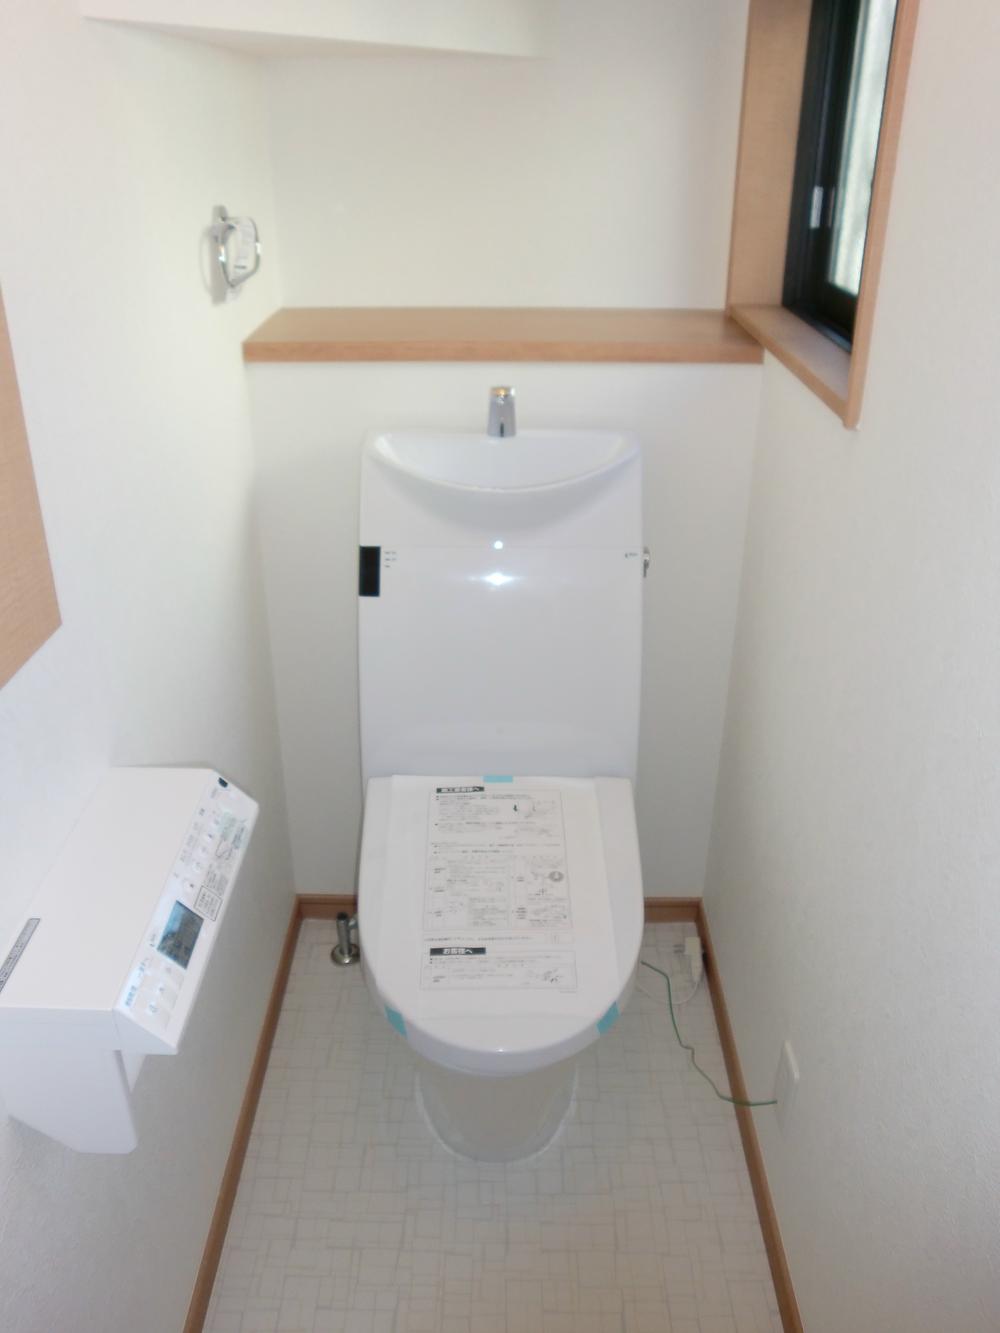 Toilet. With auto-function remote control Washlet